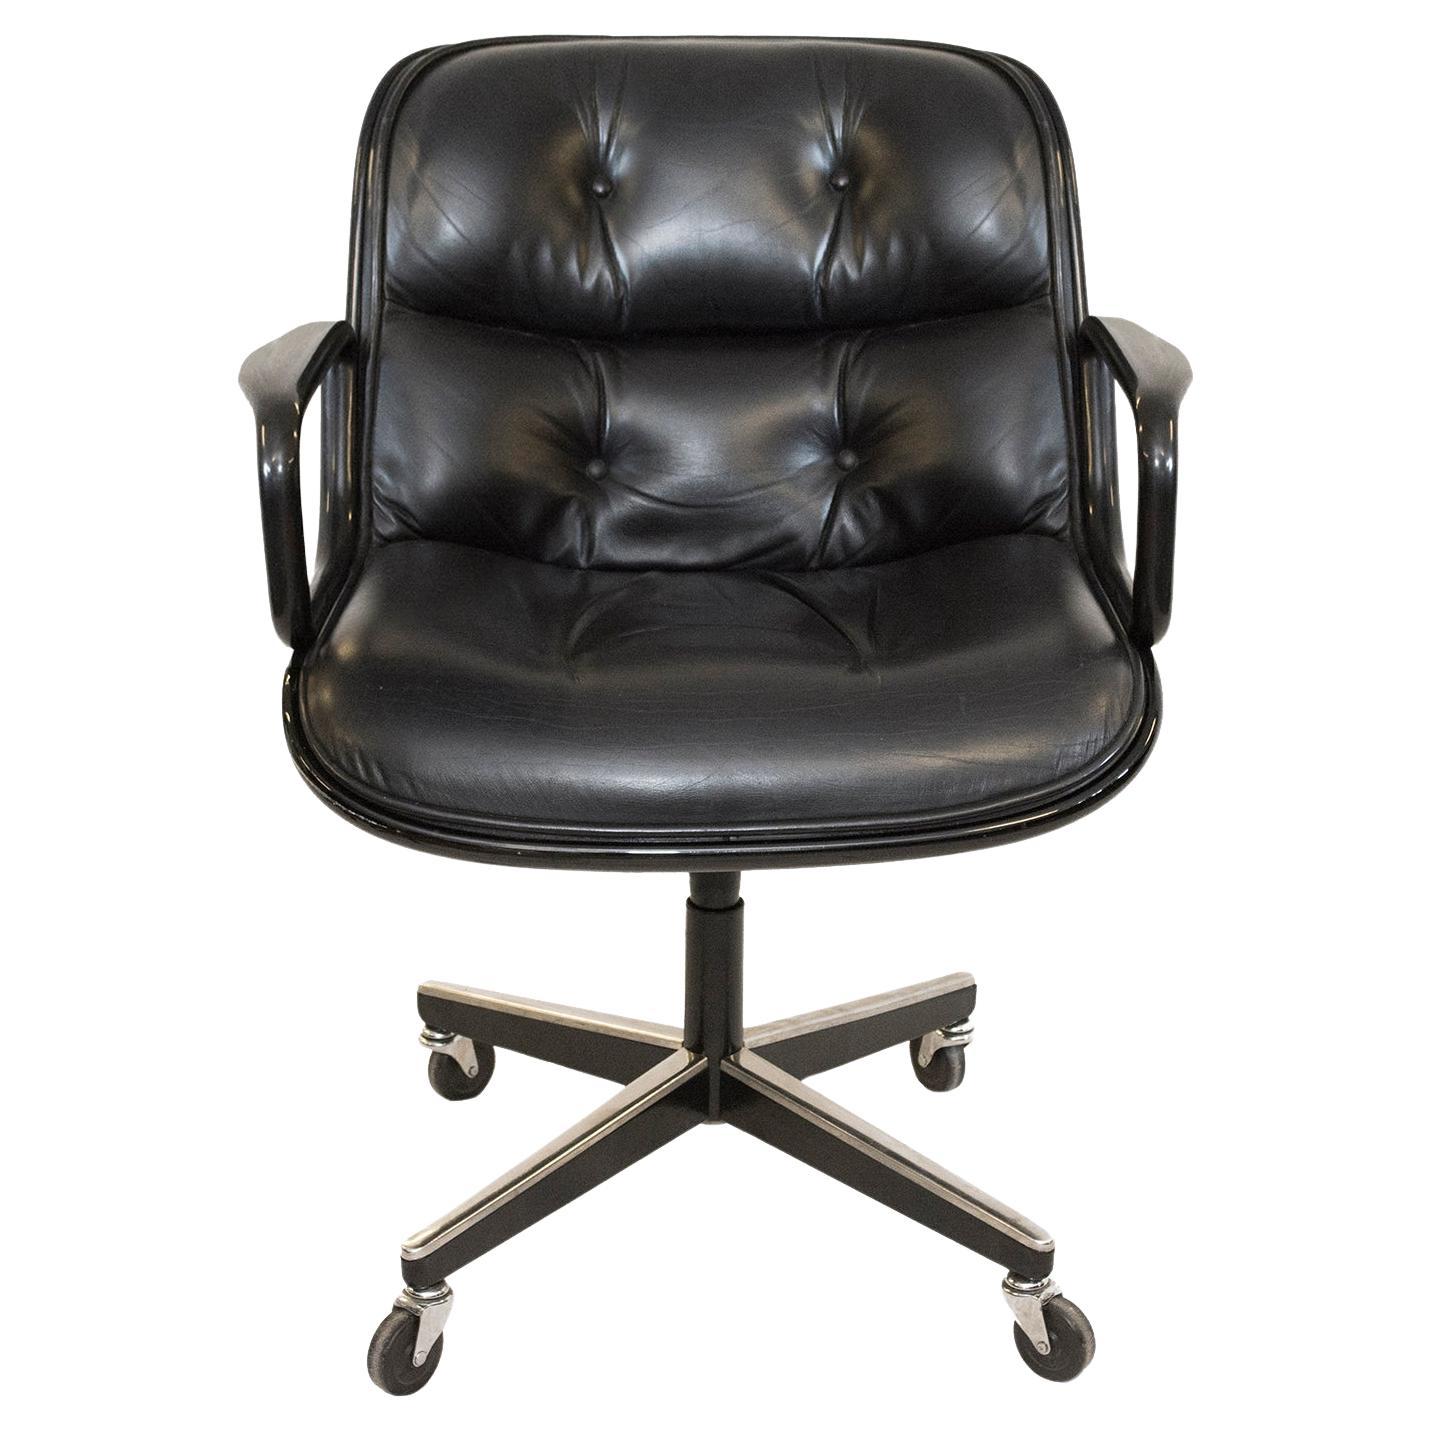 Knoll Pollock Executive Chair in Original Black Leather, Matte Black Frame For Sale